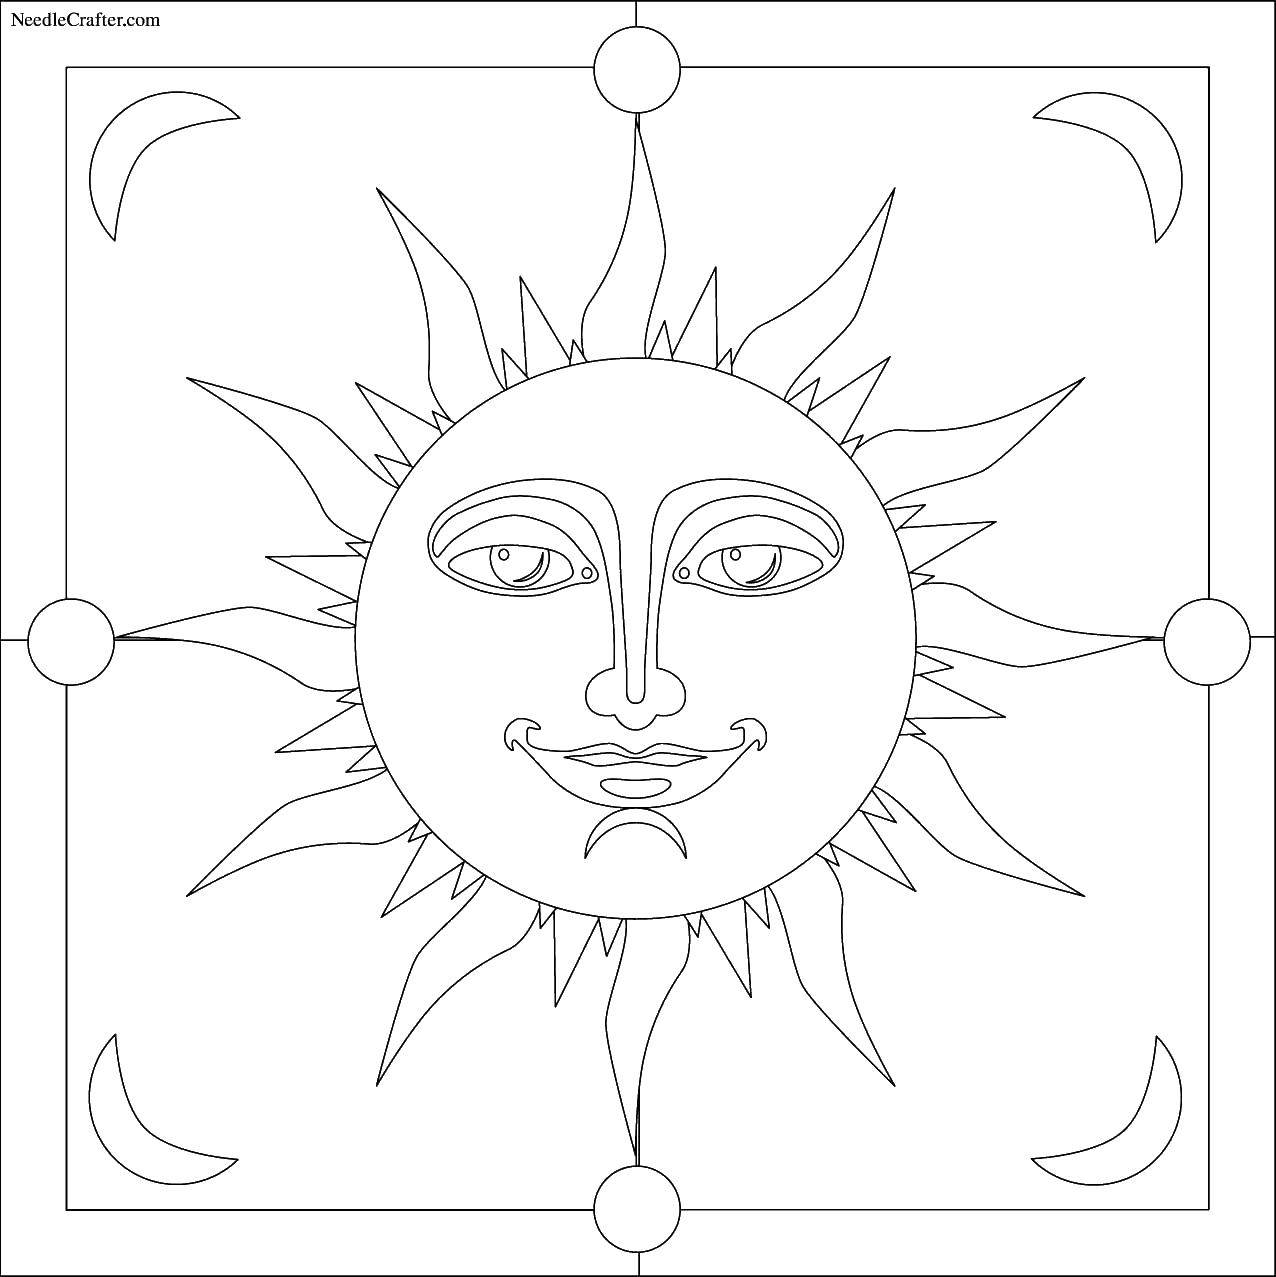 Coloring Sun with face. Category The sun. Tags:  sun, rays.